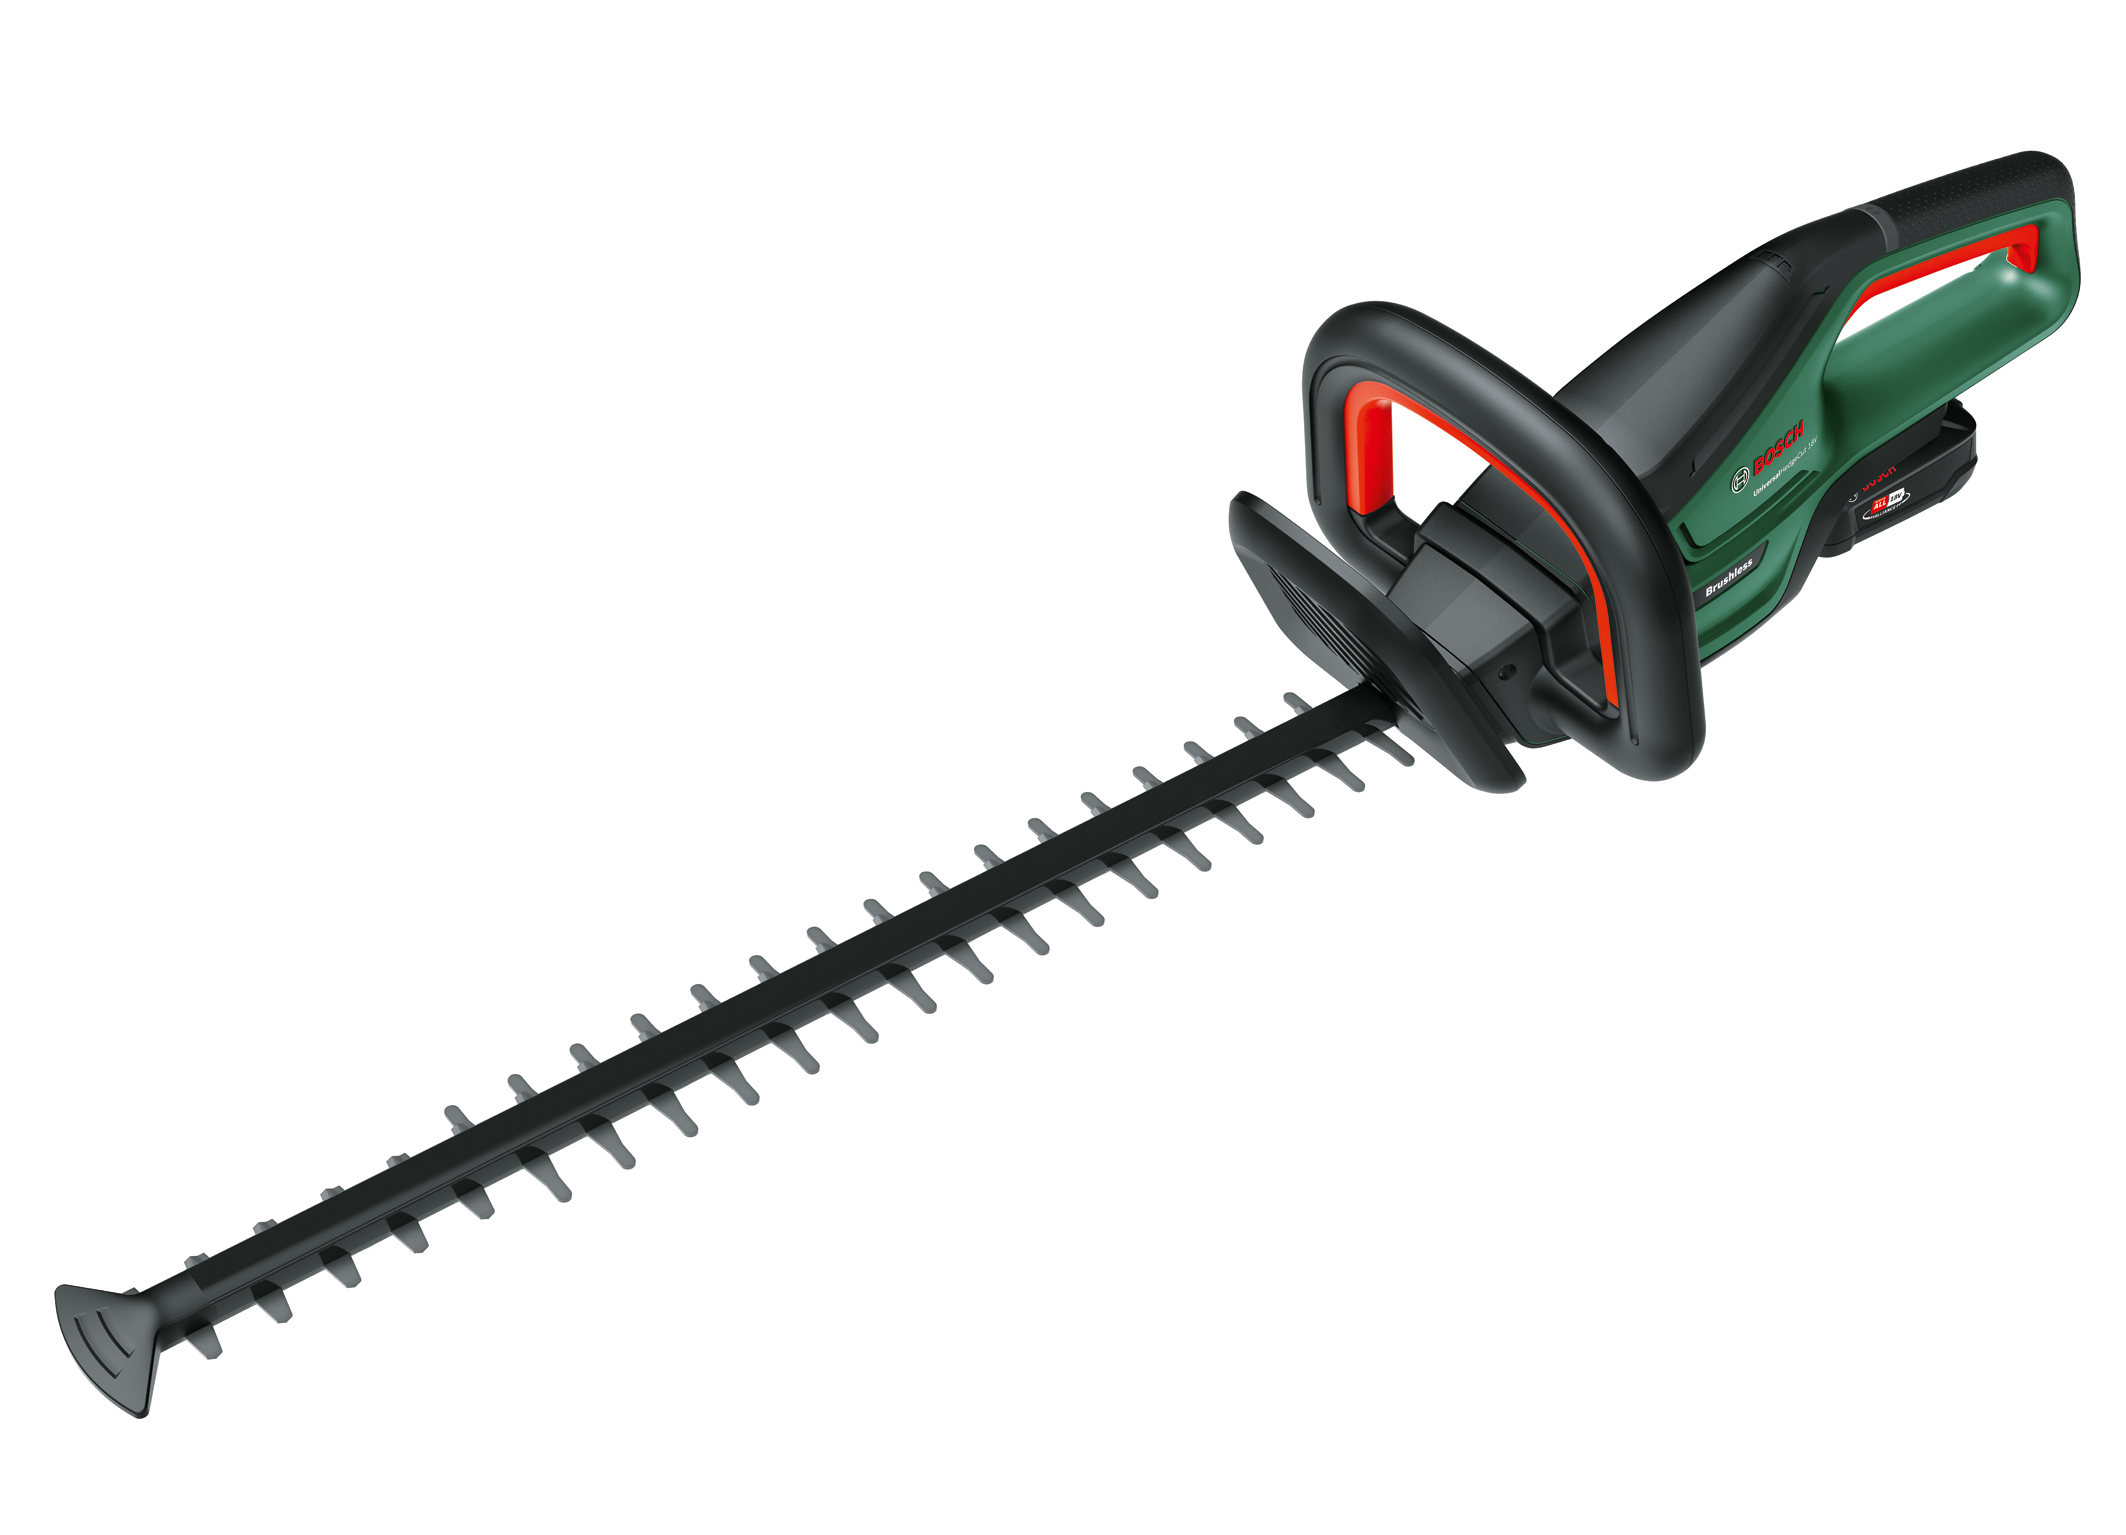 Powerful and long-lasting for hedge care: UniversalHedgeCut 18V-50 and -55 from Bosch for hobby gardeners